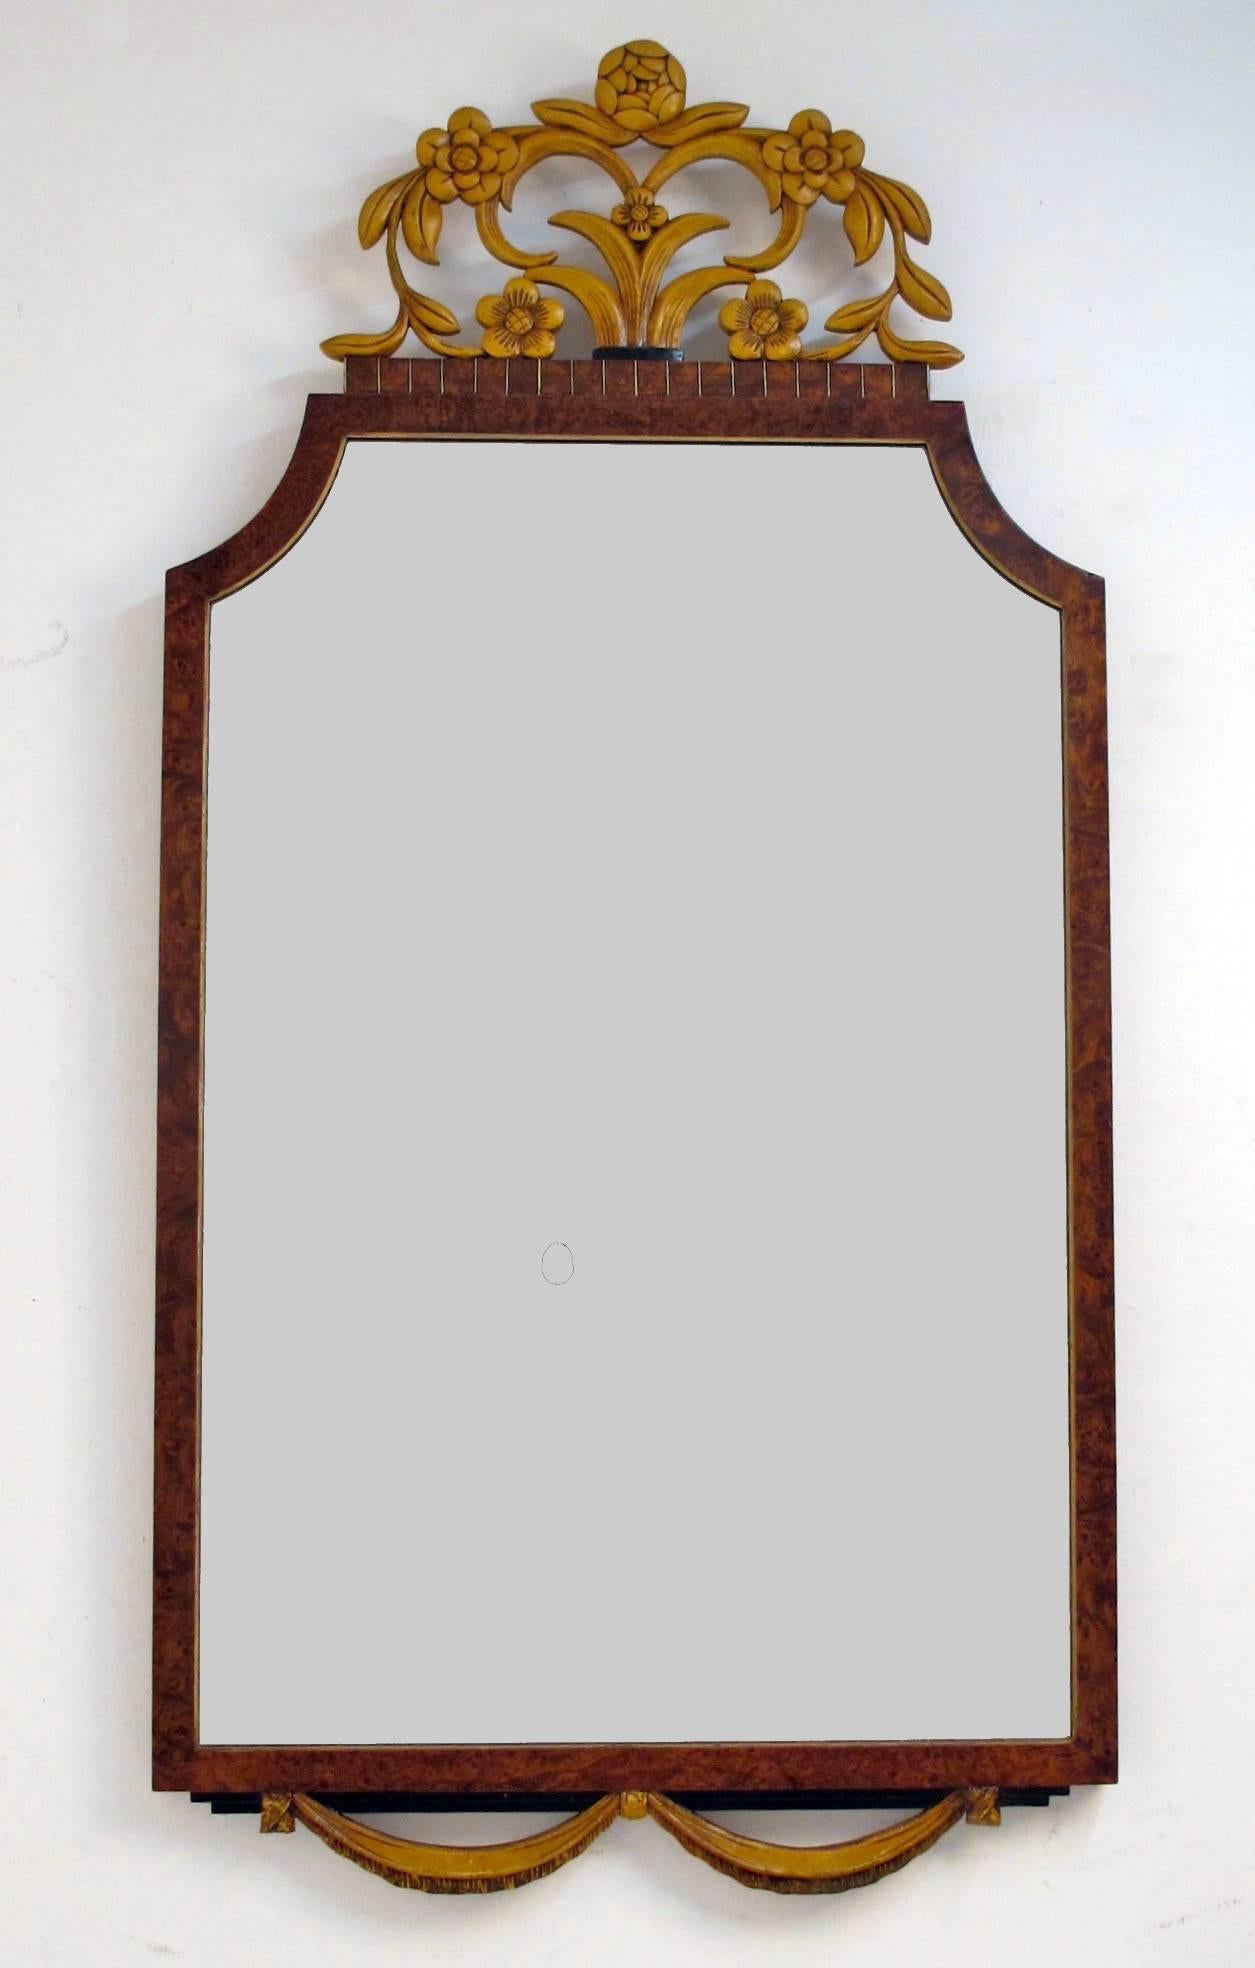 Carved and painted walnut mirror, American, 1920s.